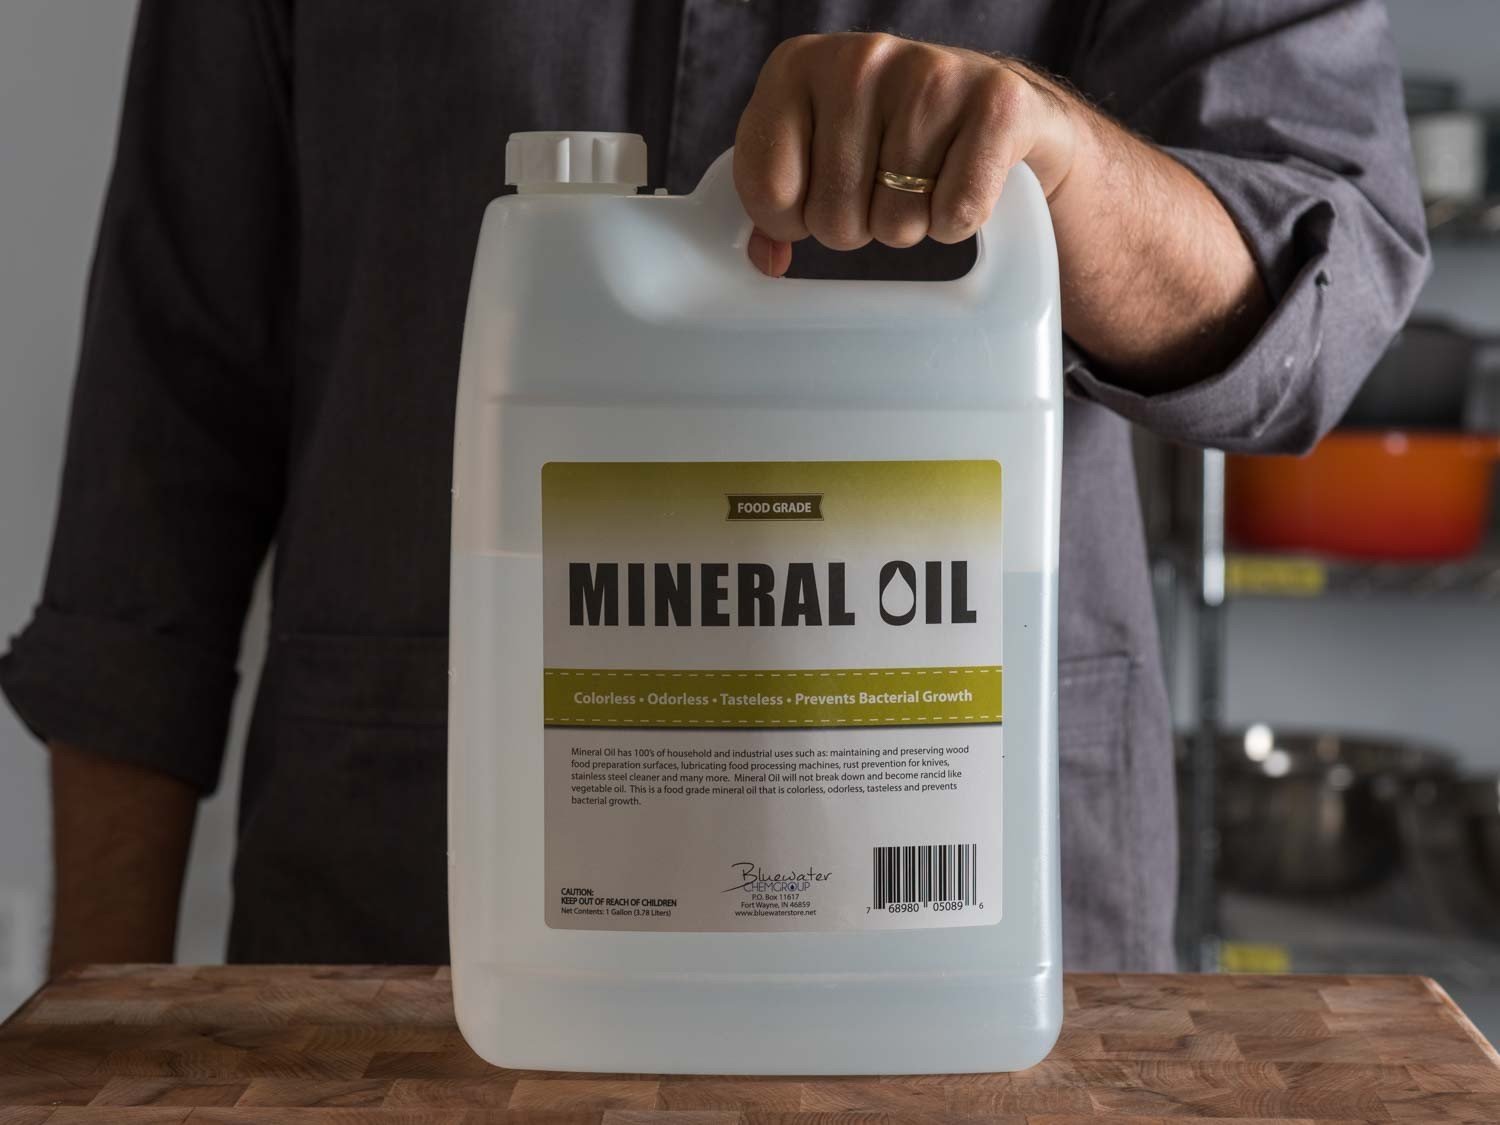 15 uses of mineral oil